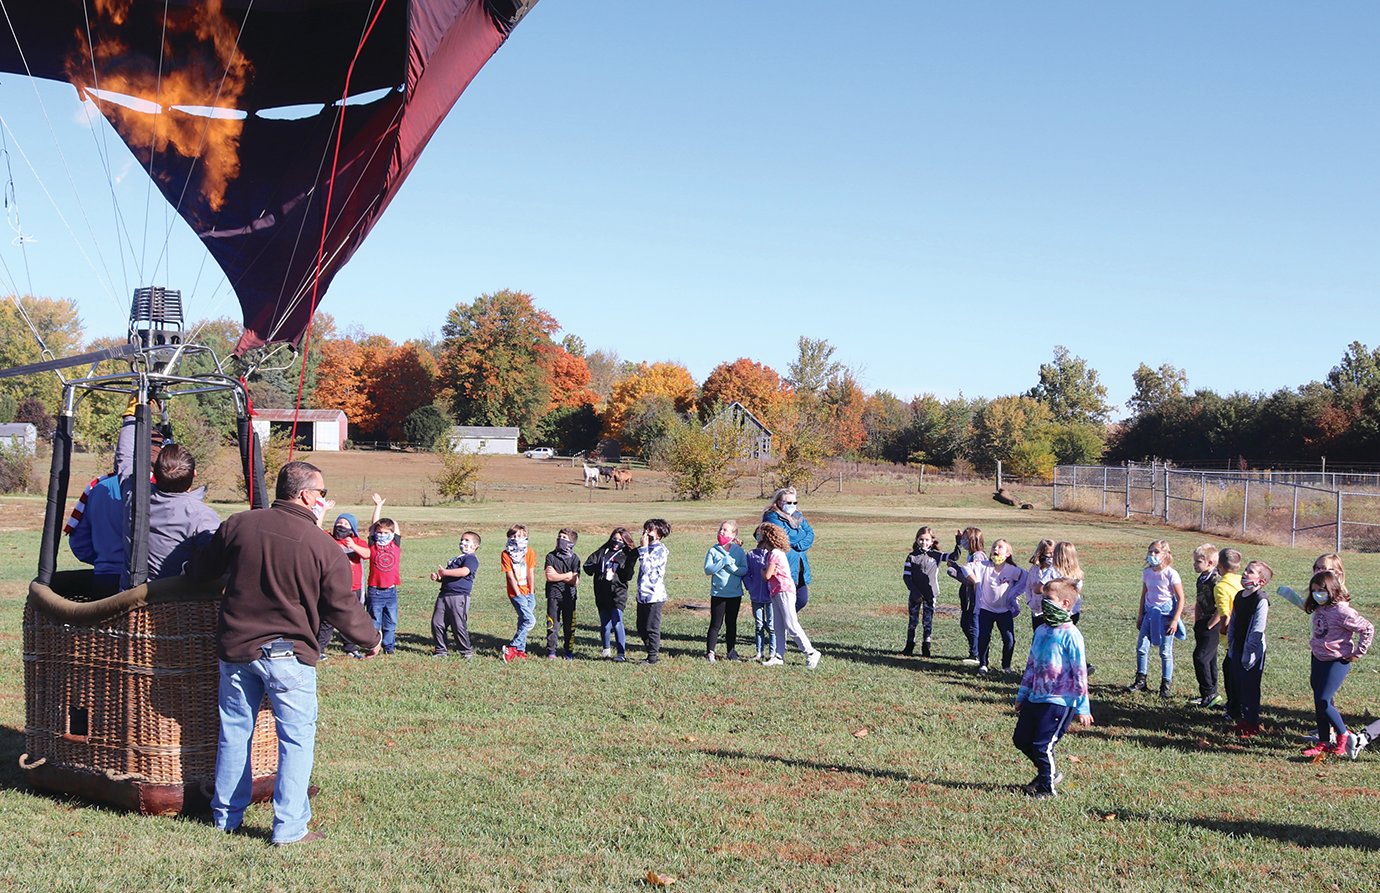 Second-grade students at Walnut Elementary experience a hot air balloon up close Tuesday. The idea to bring a field trip to the students is the result of a team effort between South administrators and members of the district's Parent-Teacher Organization to supplement a canceled carnival and annual trips in light of the coronavirus (COVID-19) crisis.